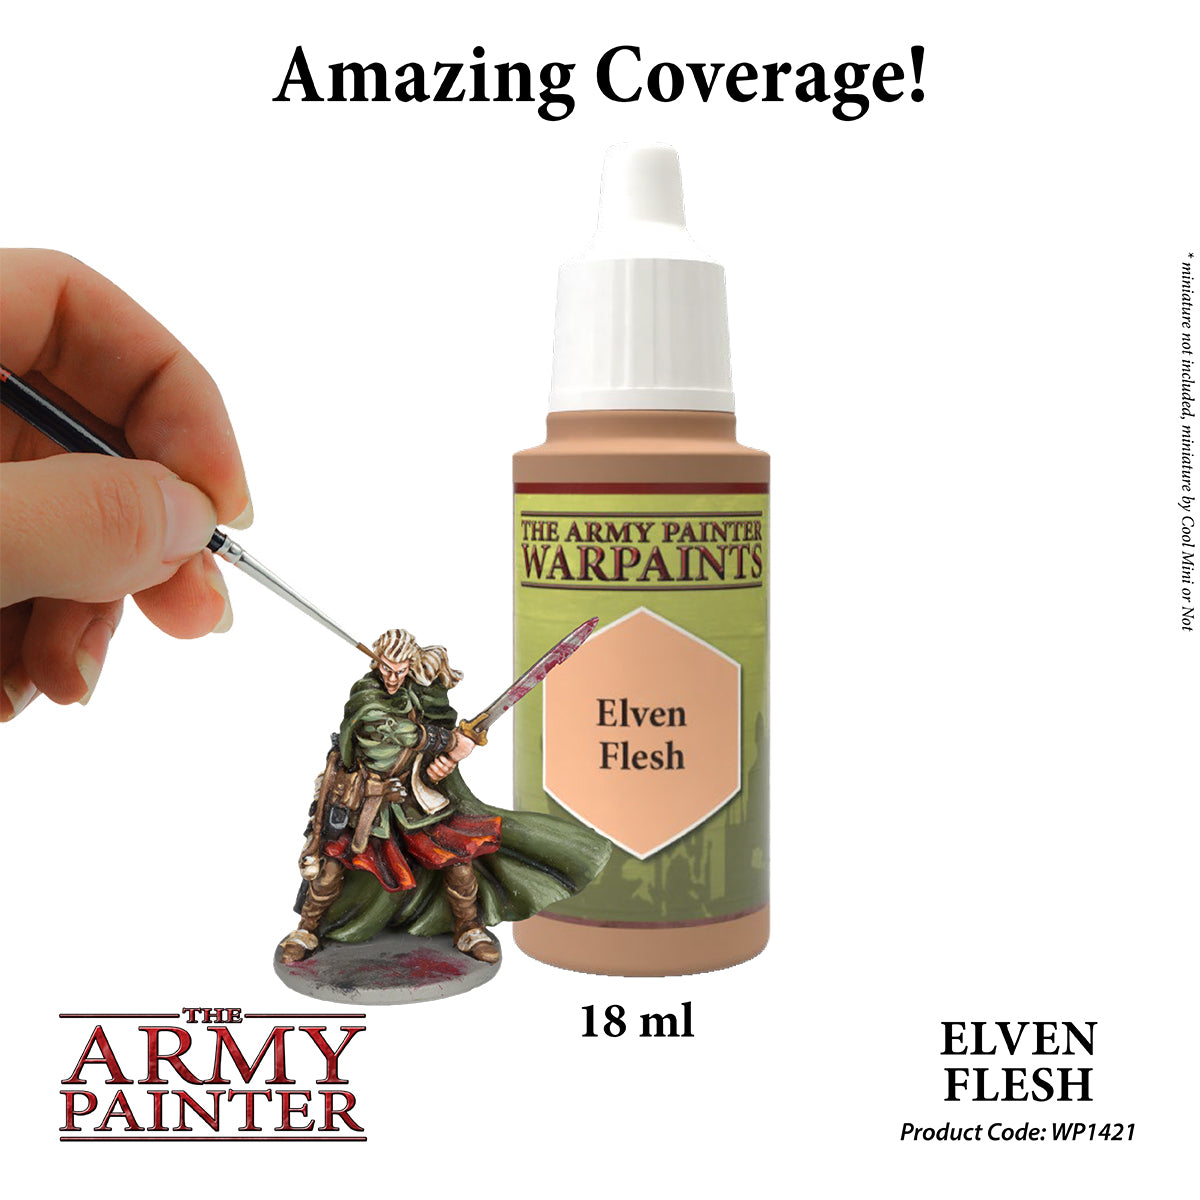 Army Painter Color Primer: Dragon Red (400ml), Accessories & Supplies